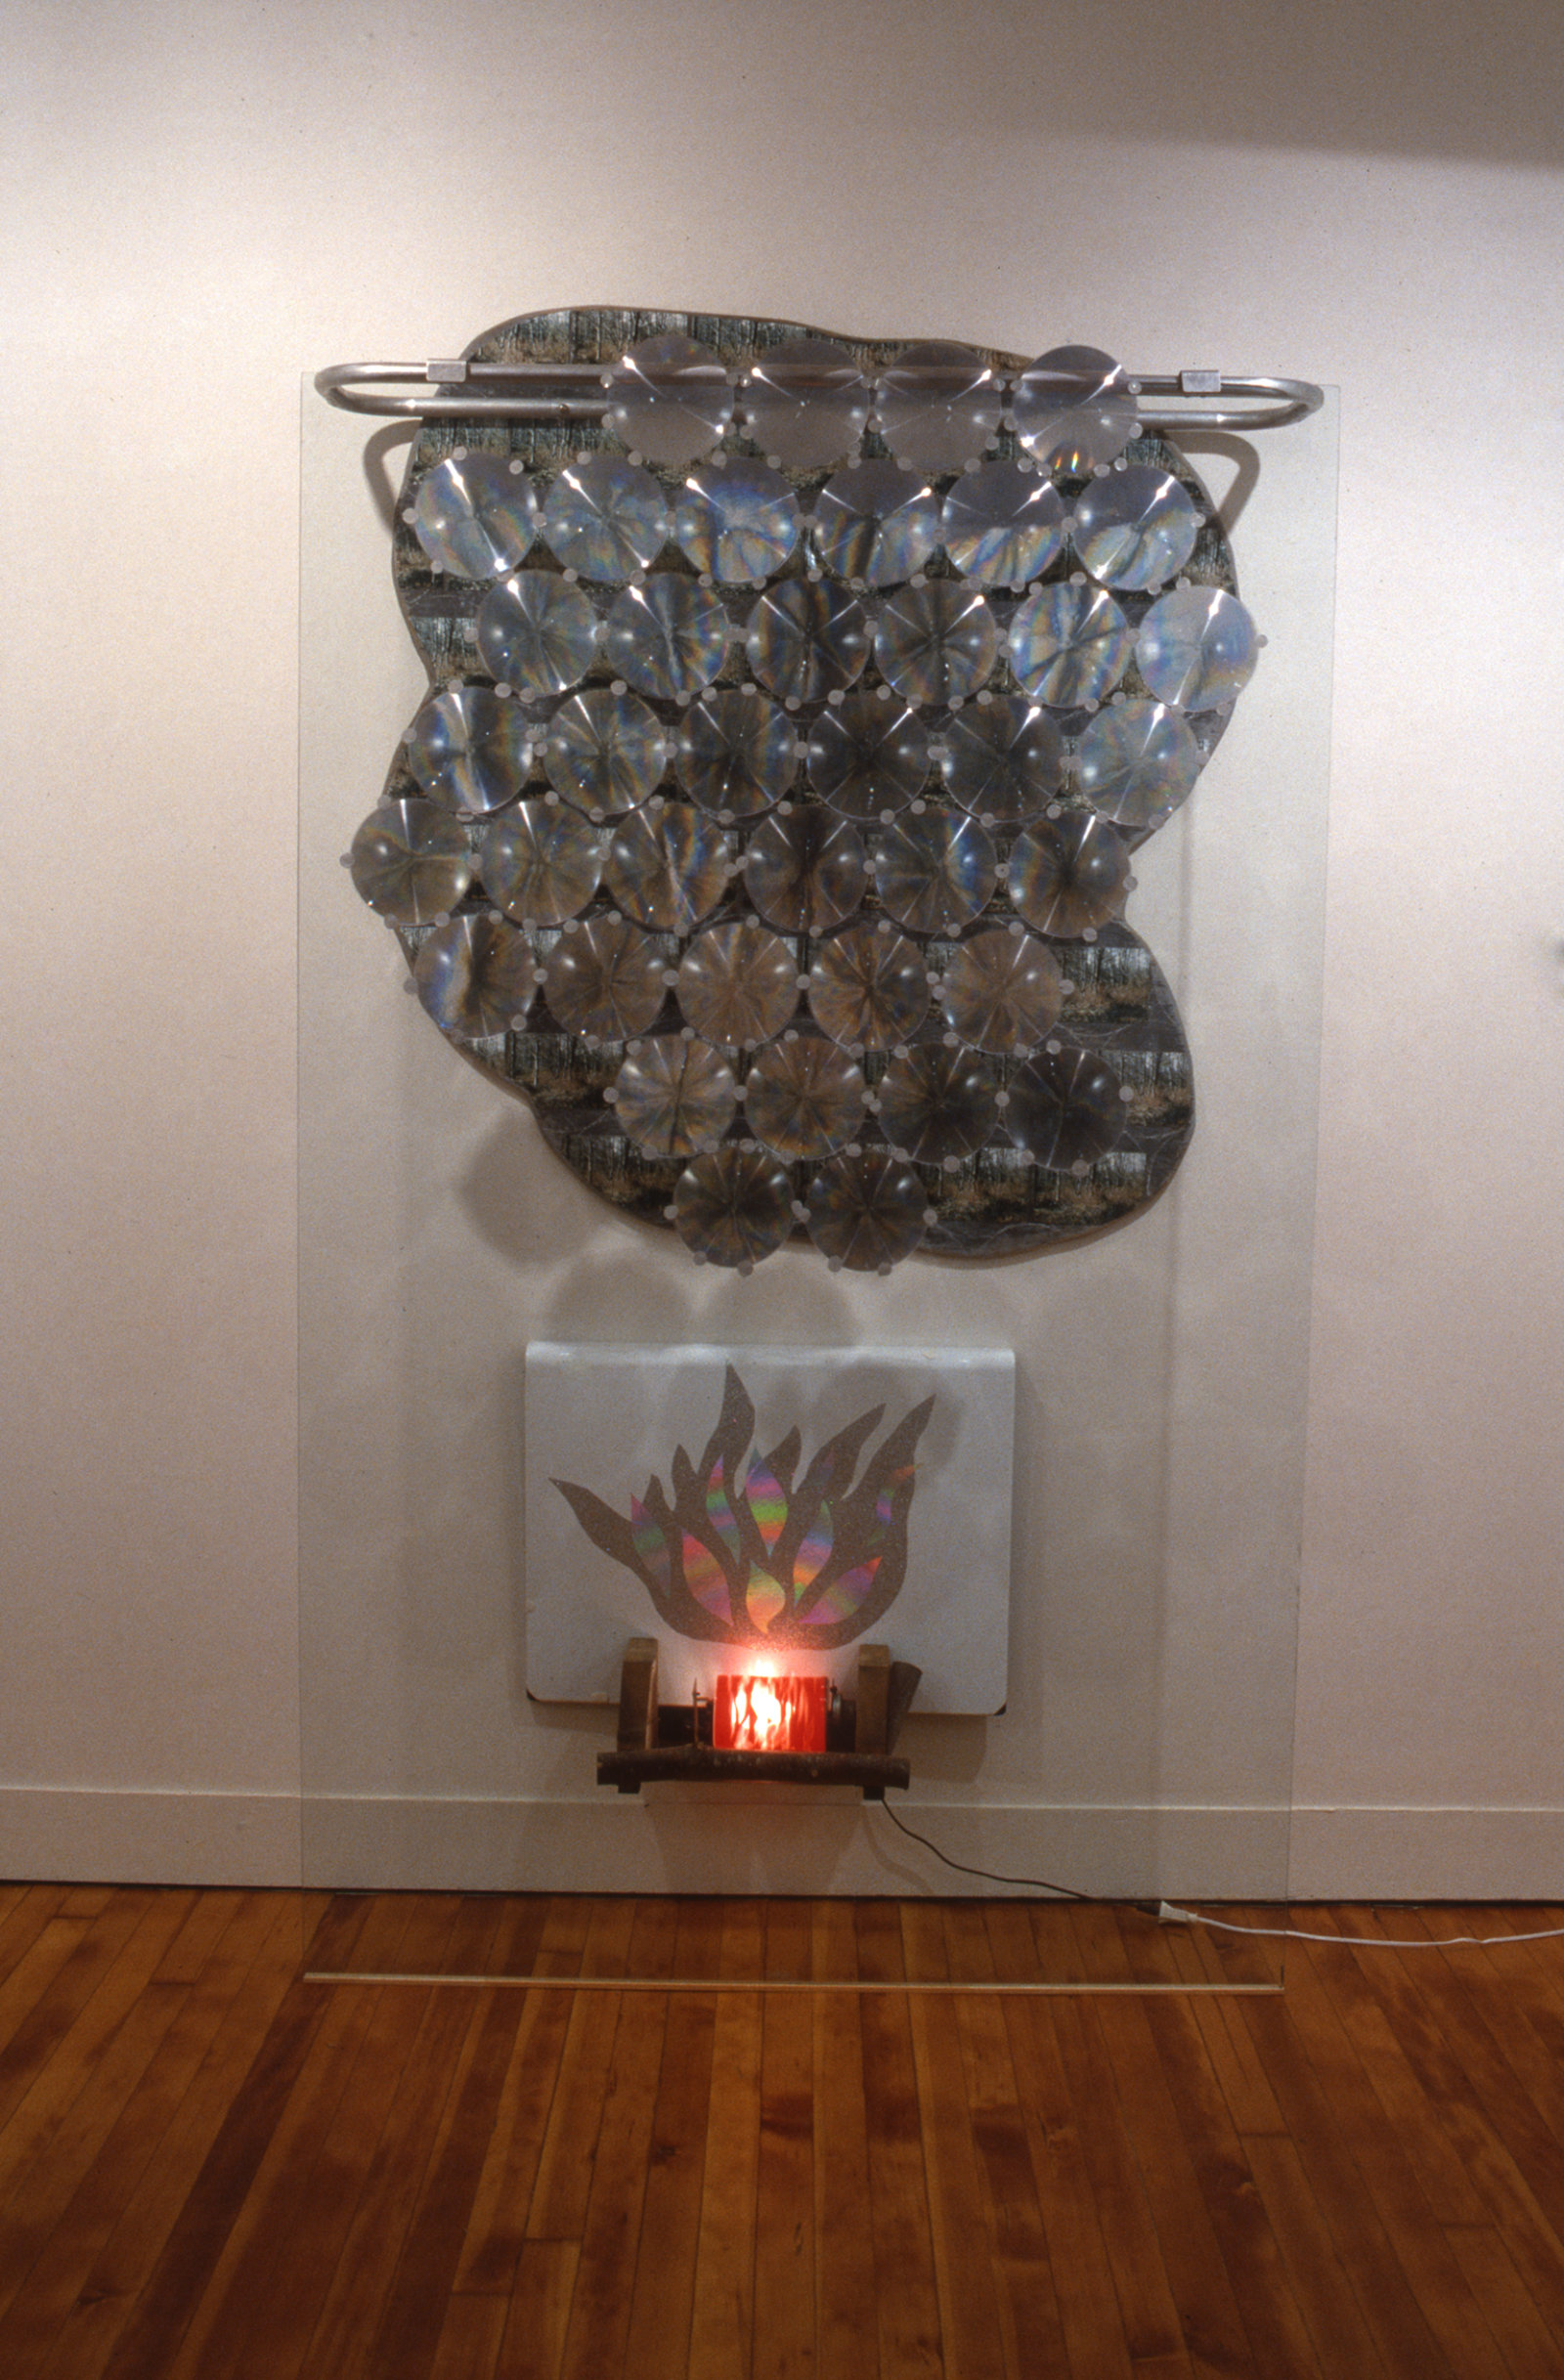 Jerry Pethick, Ancestral Dream, 1993, photographs, stove cement, plywood, aluminum, glass, fresnel lenses, enamelled steel, spectrafoil, light bulb, plastic cylinder, electric motor, wood, 84 x 49 x 12 in. (213 x 125 x 31 cm)